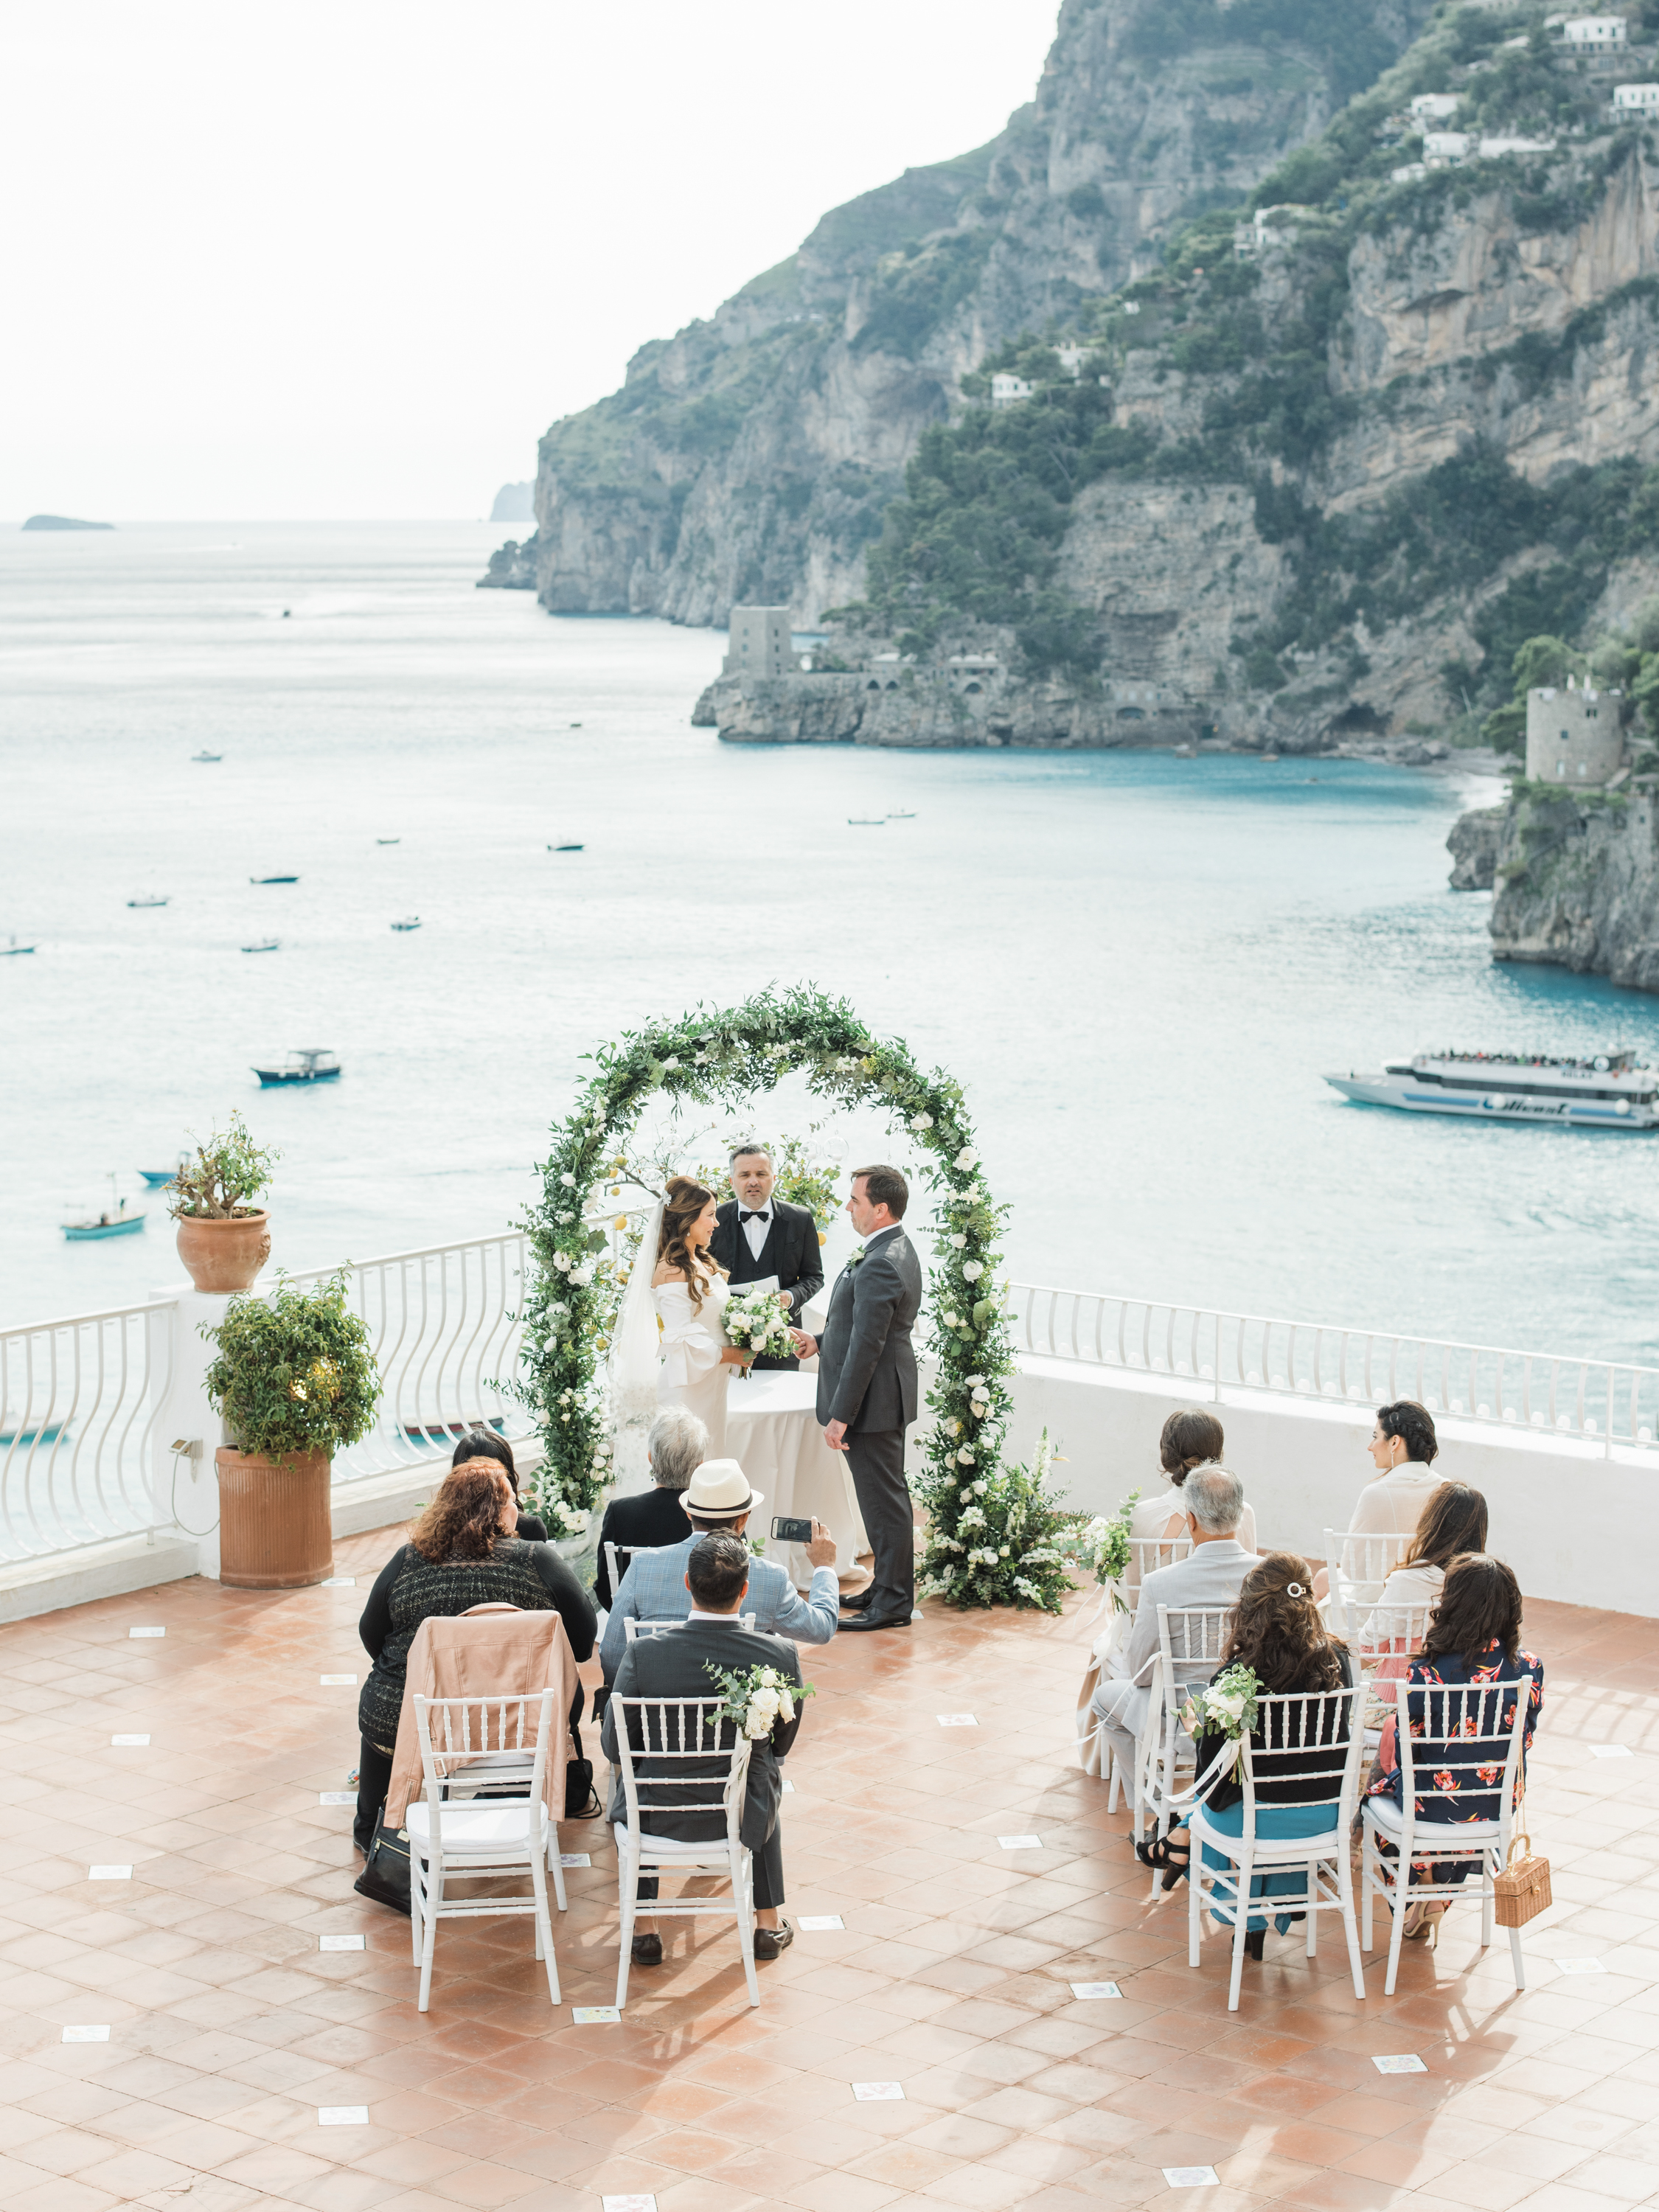 Elopements: How to find the ideal location - Lake Como